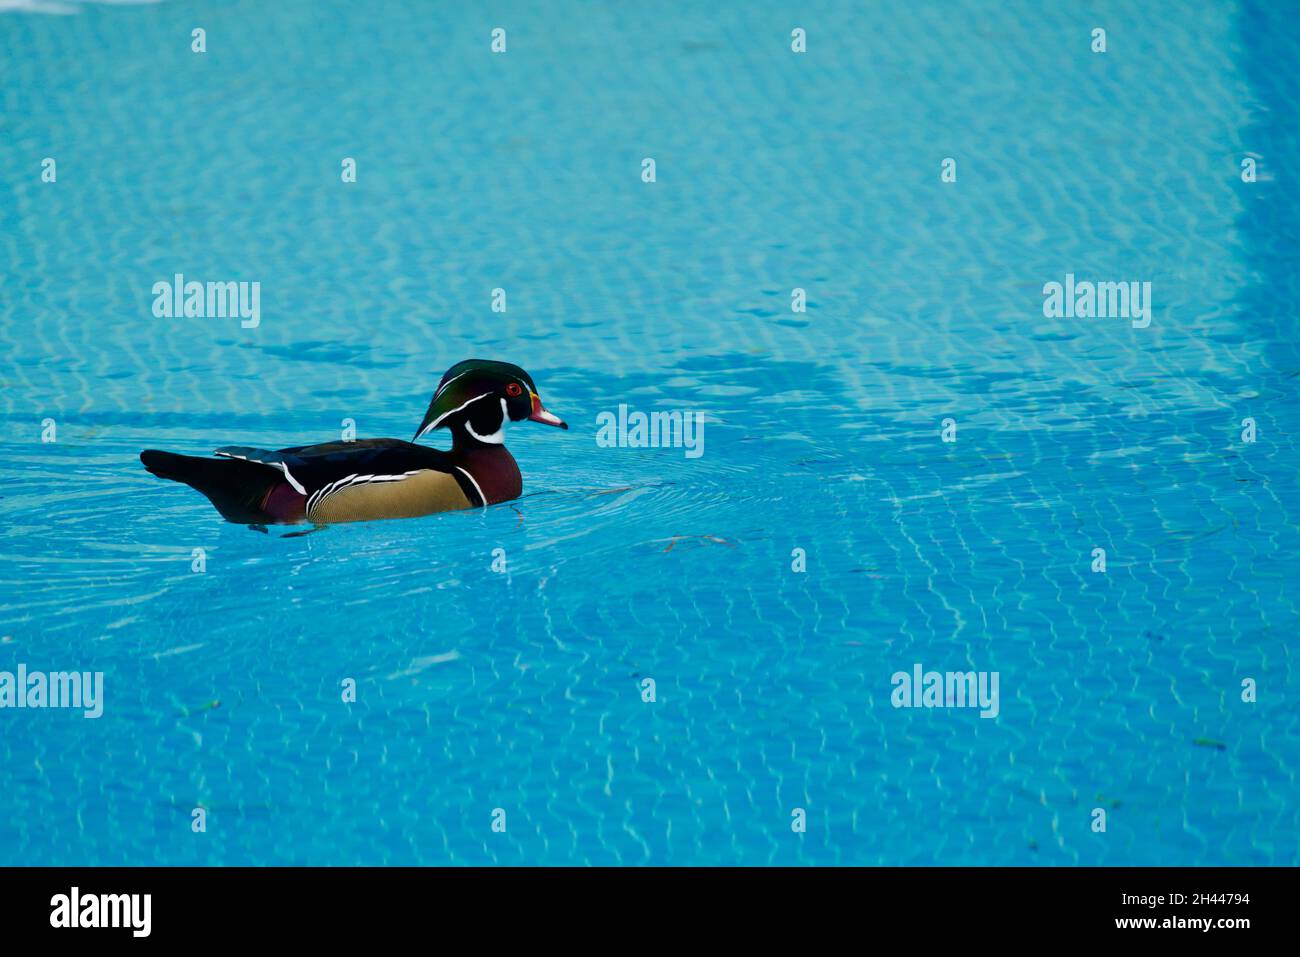 Wood duck in a swimming pool Stock Photo